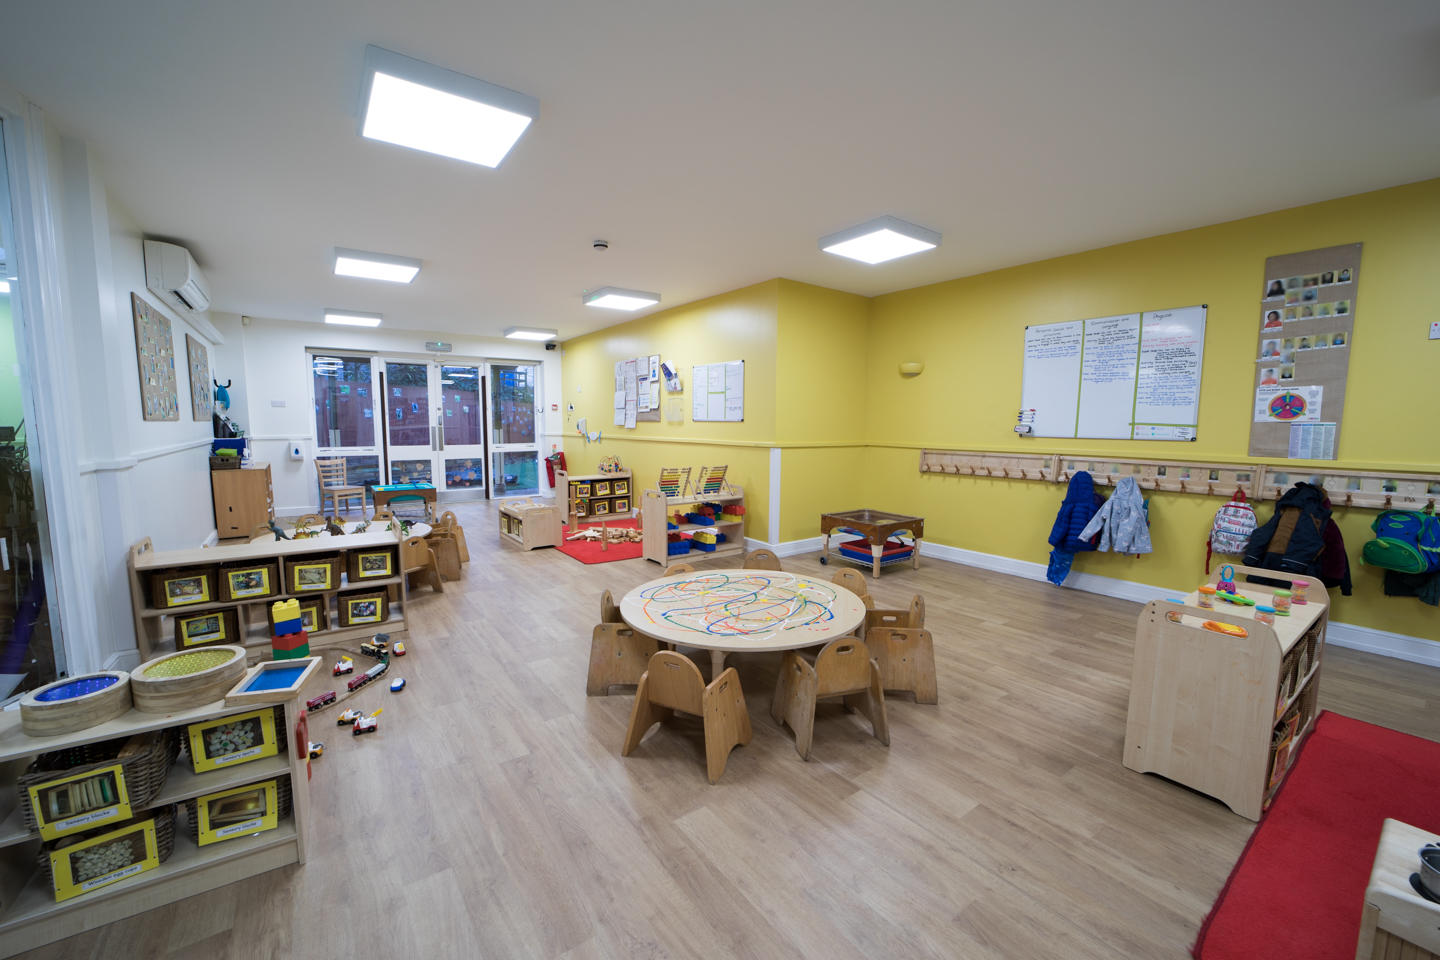 Bright Horizons Crouch End Fields Day Nursery and Preschool London 03432 496271